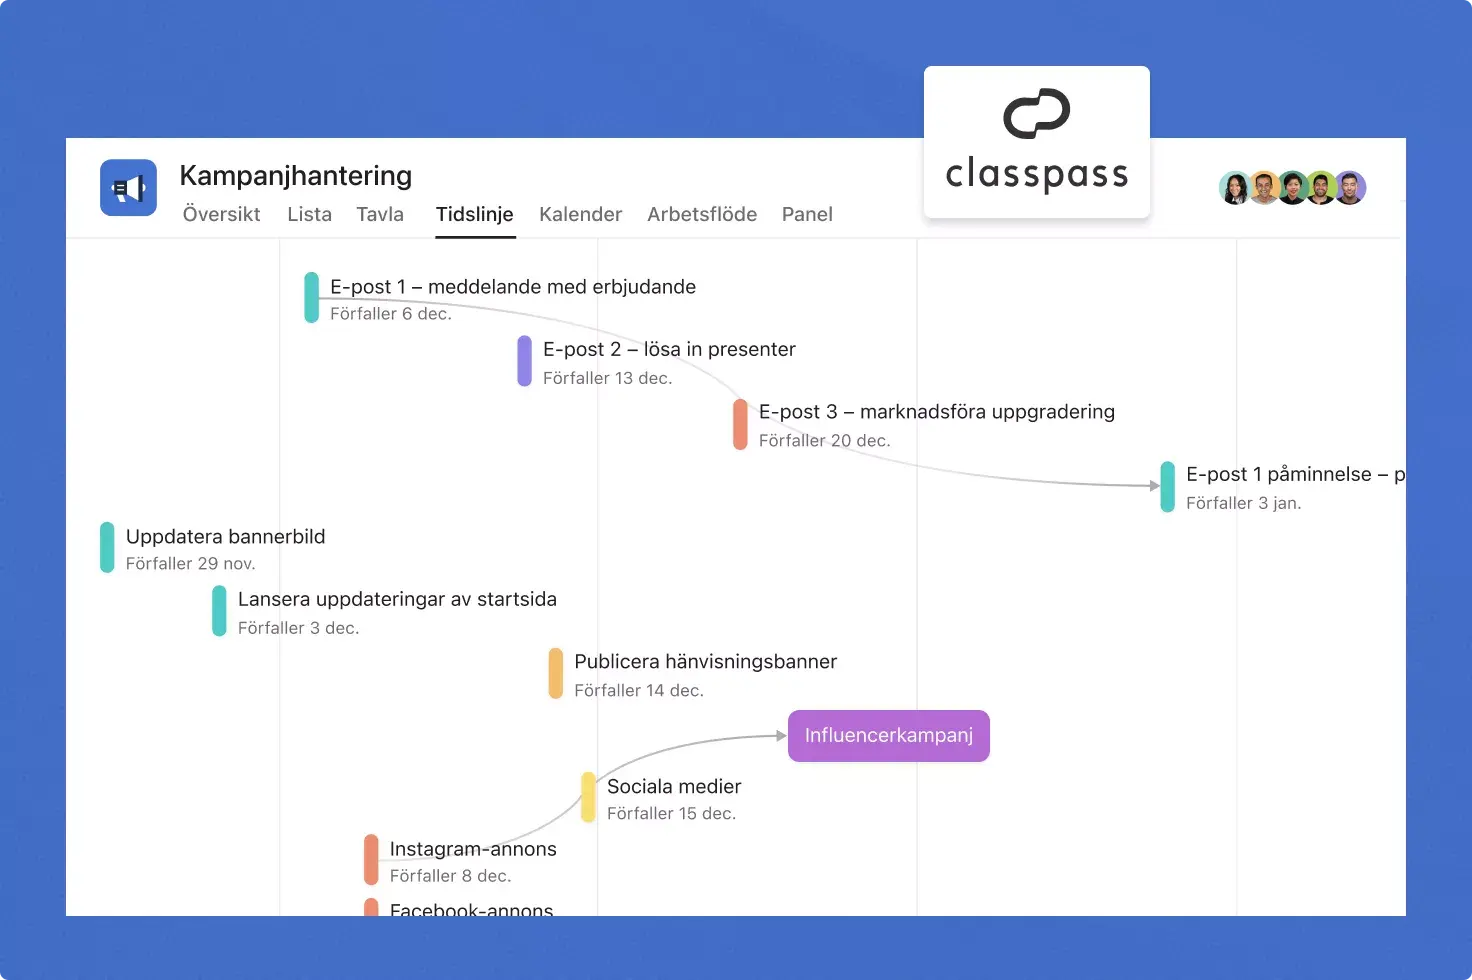 ClassPass uses Asana for their campaign management workflow